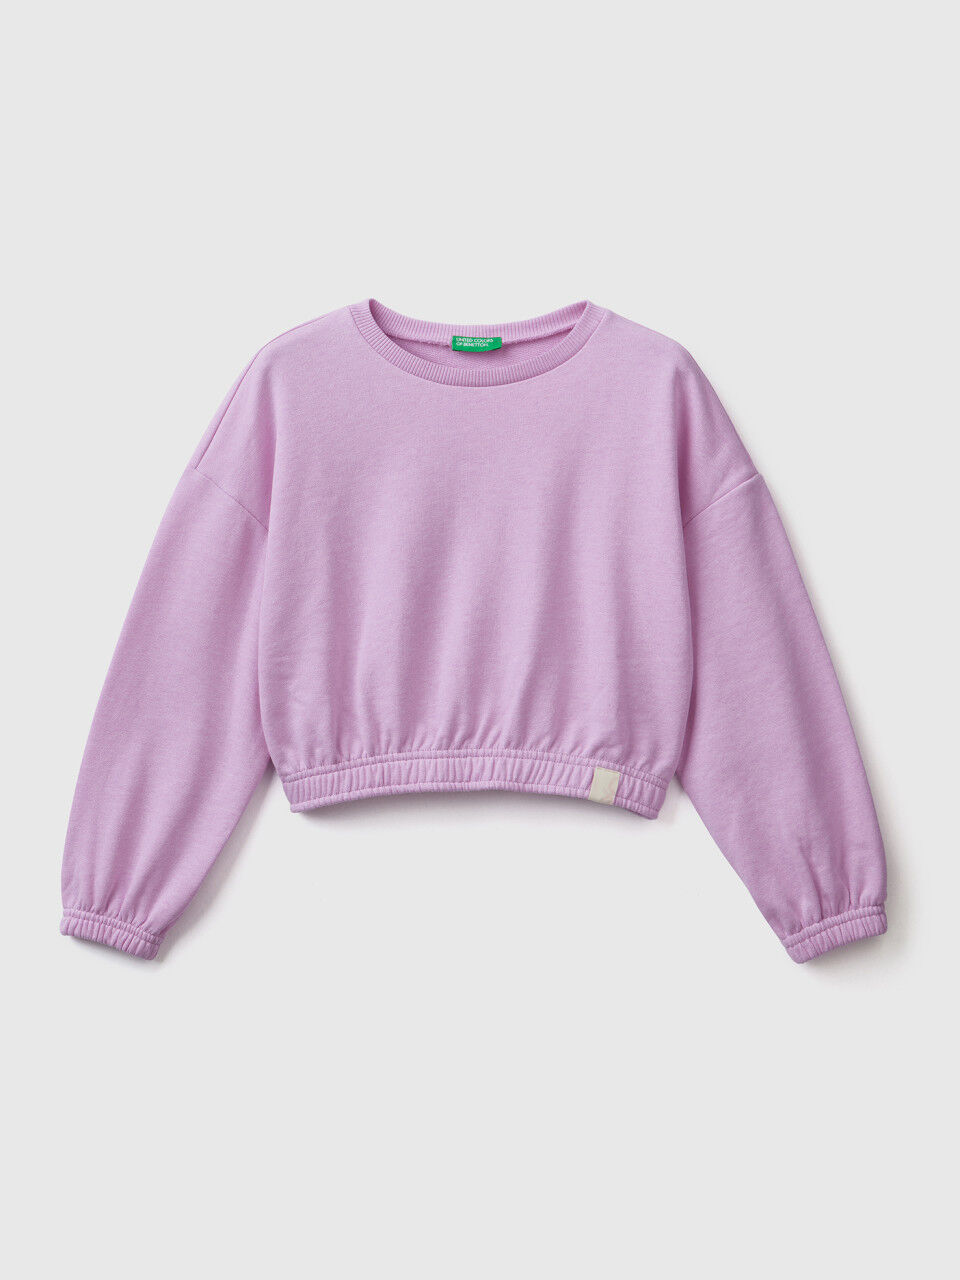 Cropped sweatshirt in recycled fabric